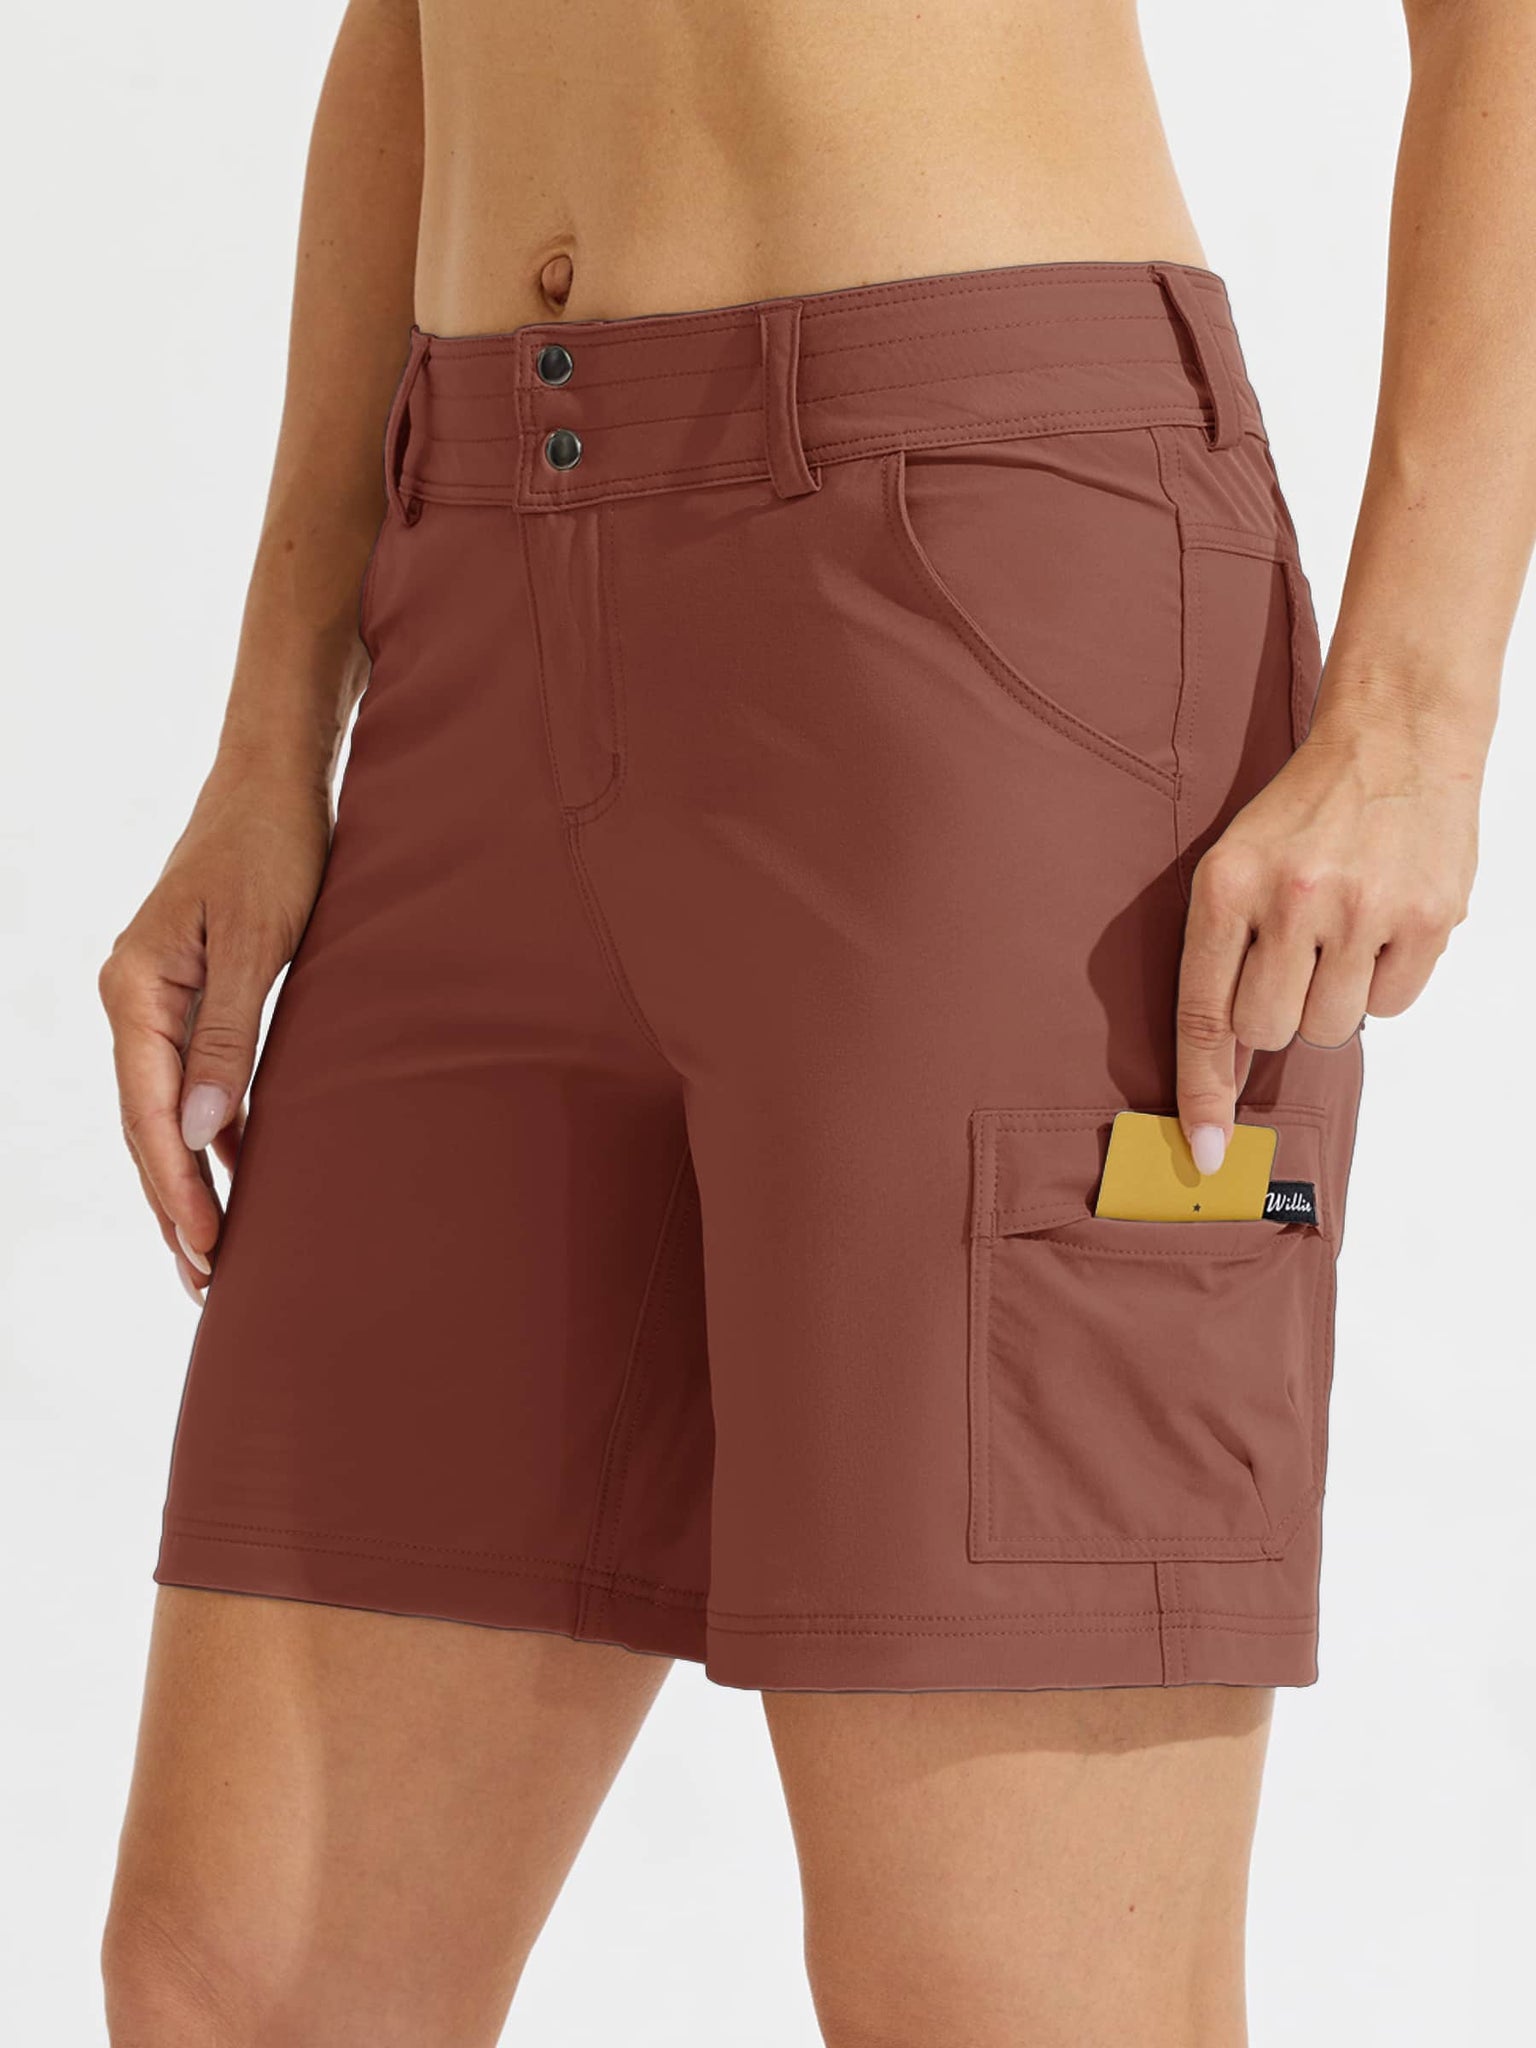 Women's Outdoor Pro Shorts Cacao_model3